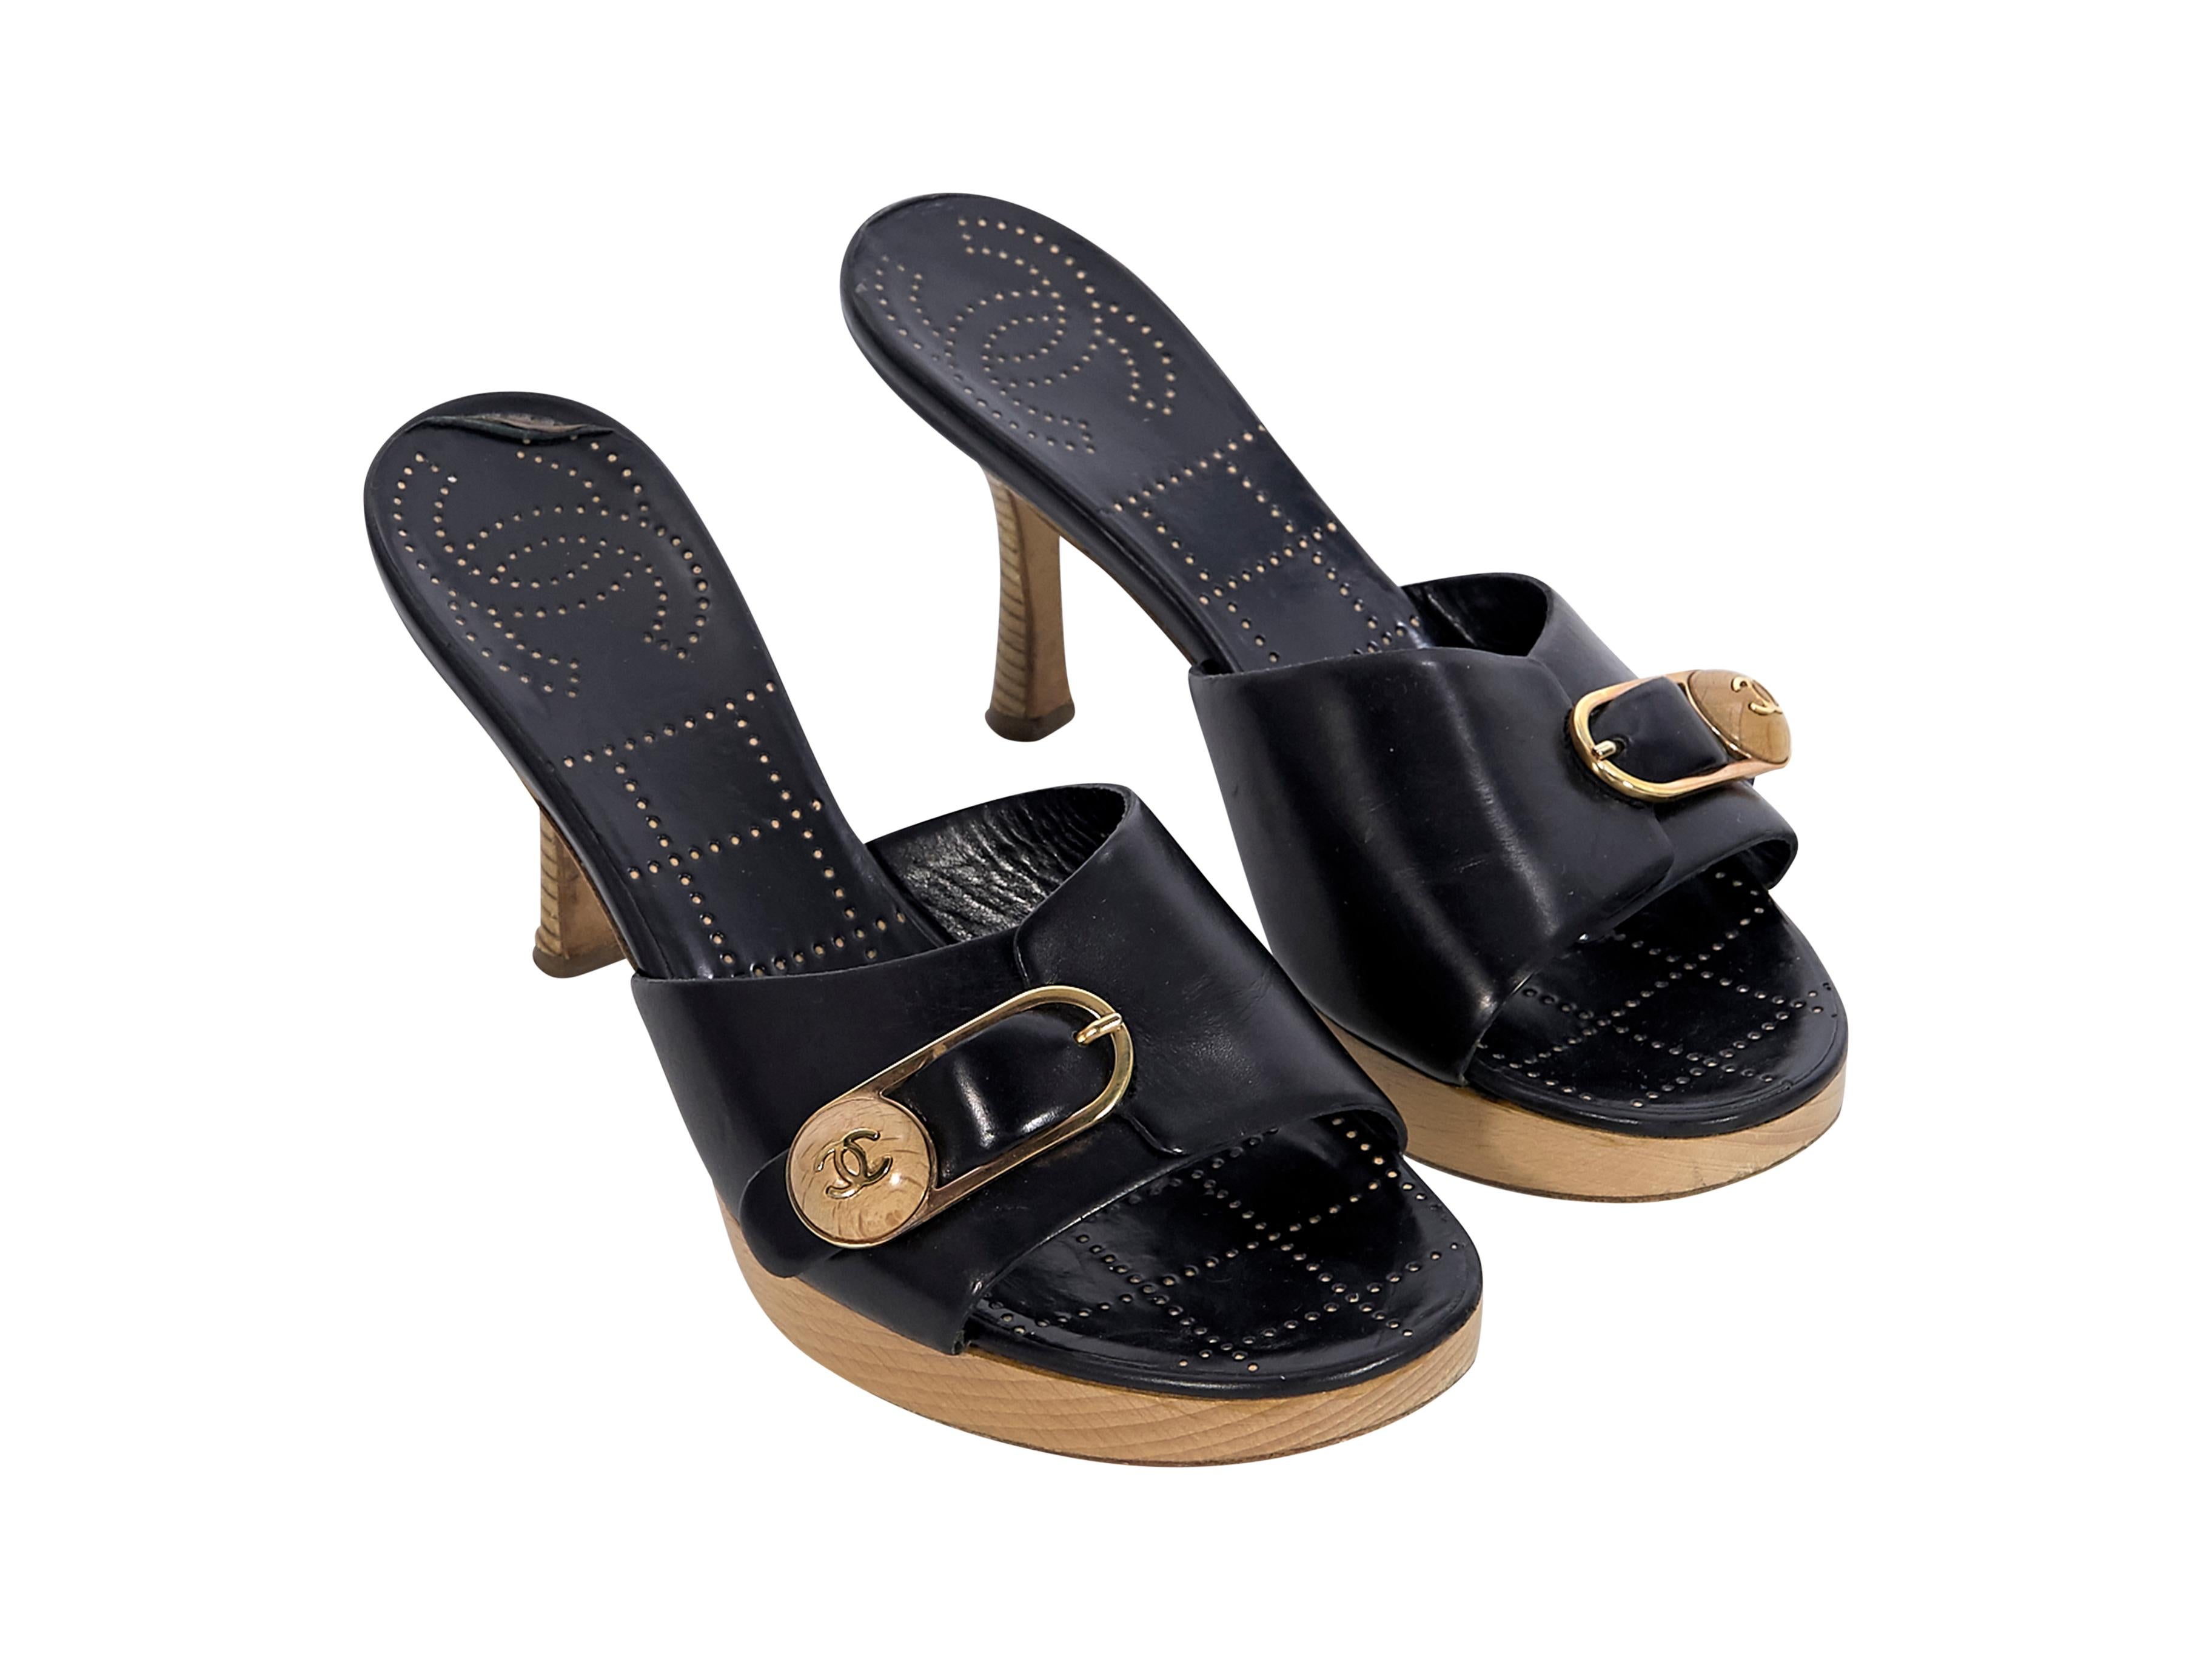 Product details:  Black leather heeled mules by Chanel.  Gold-tone logo buckle at vamp. Round toe. Wooden heel and platform. Slip-on style. Label size FR 37. Style with leather mini shorts. 3